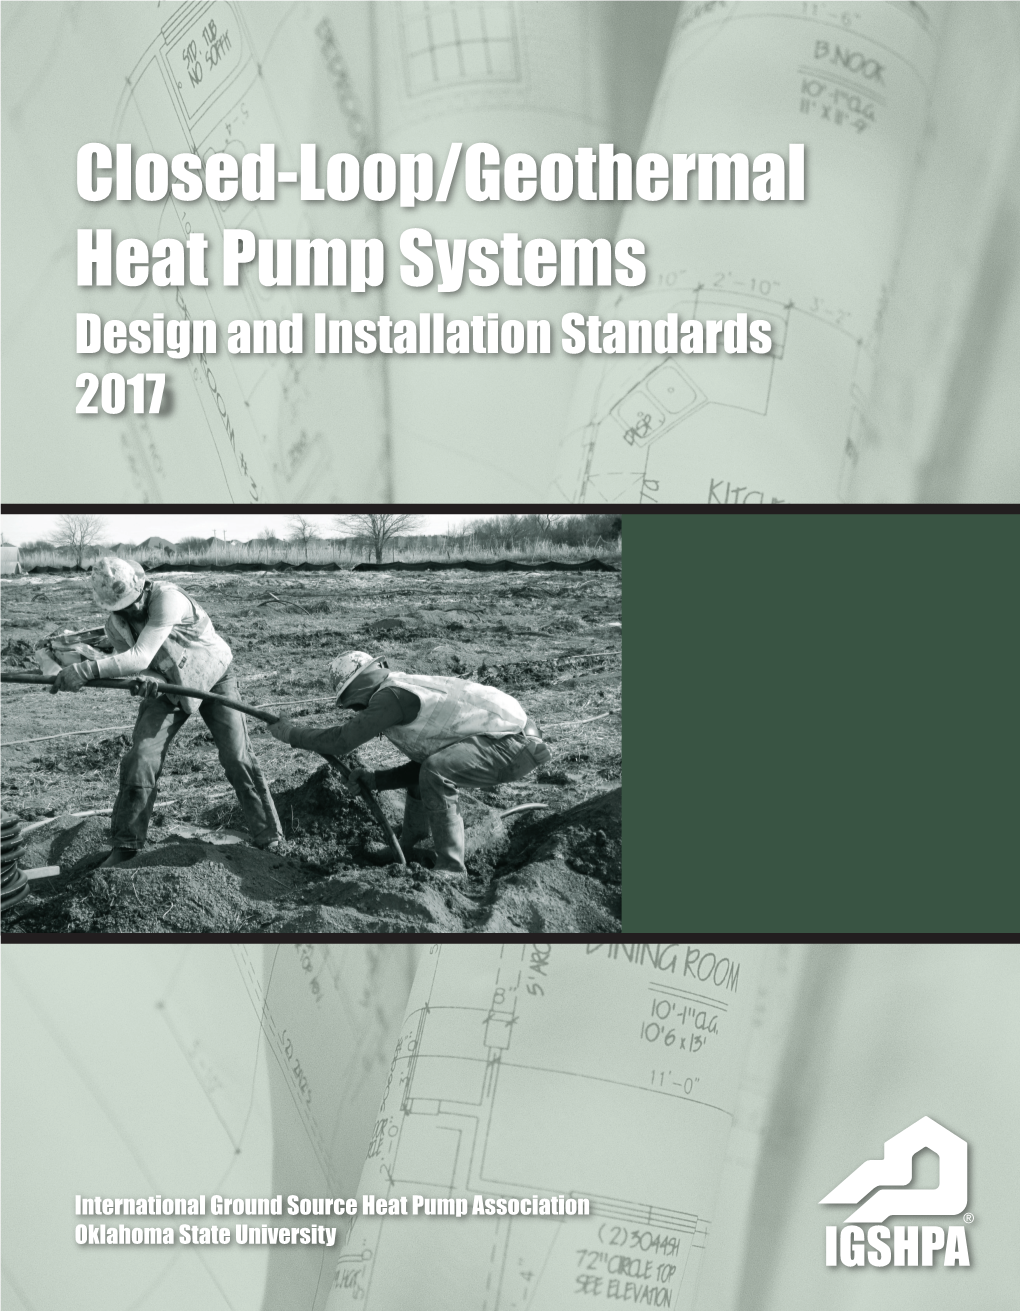 Closed-Loop/Geothermal Heat Pump Systems Design and Installation Standards 2017